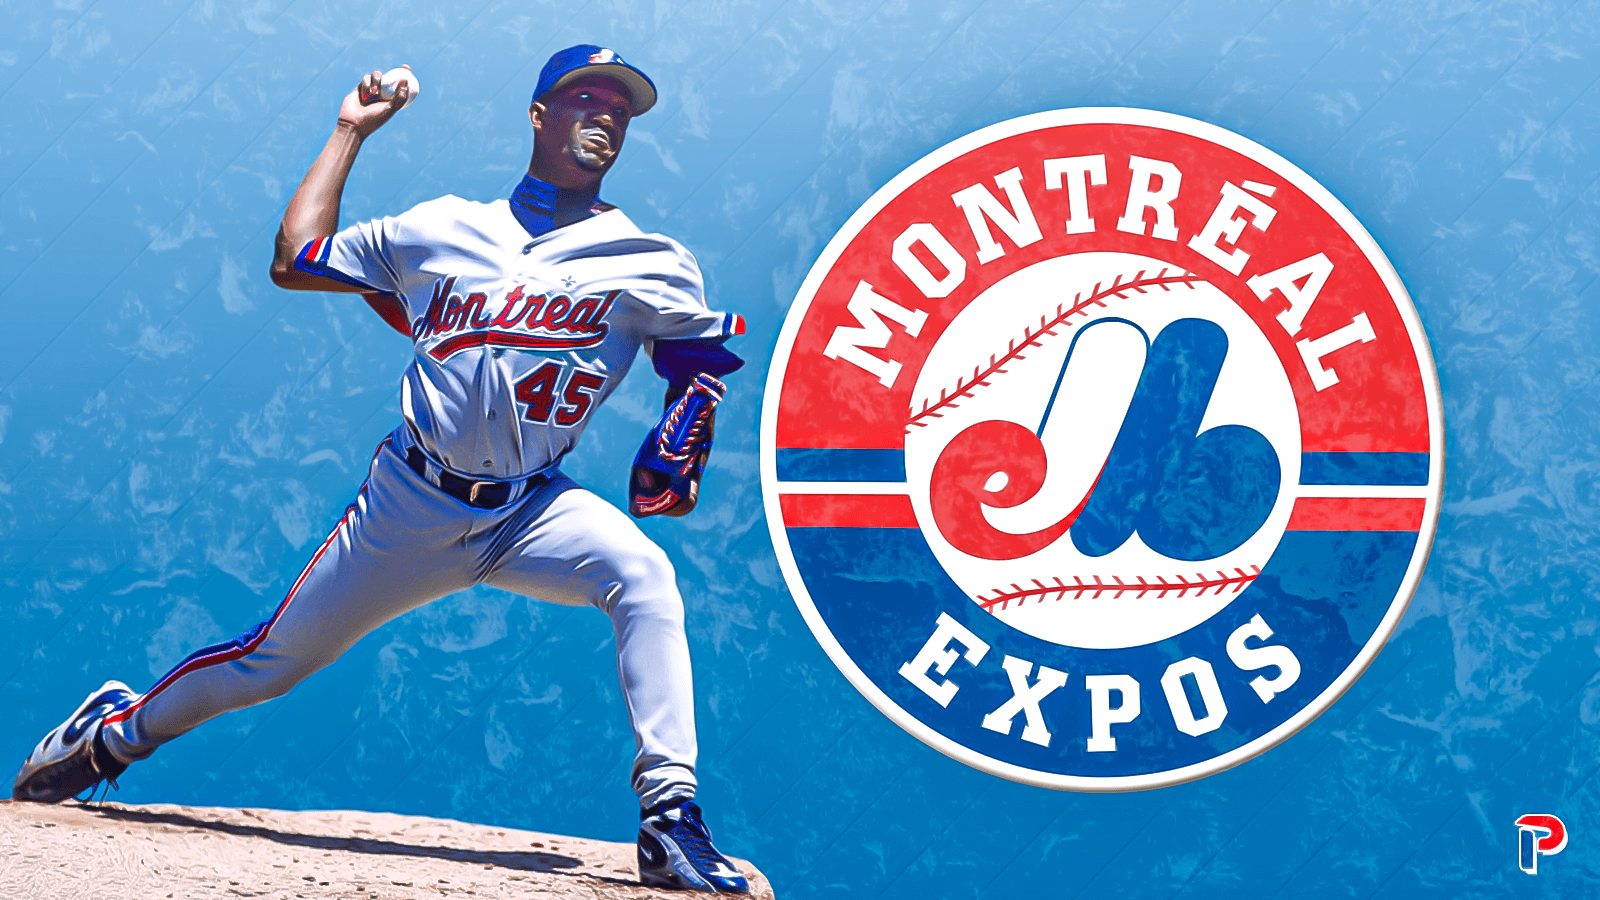 The Montreal Expos in 2020, Pt. 2: Possibilities in the Near and Far